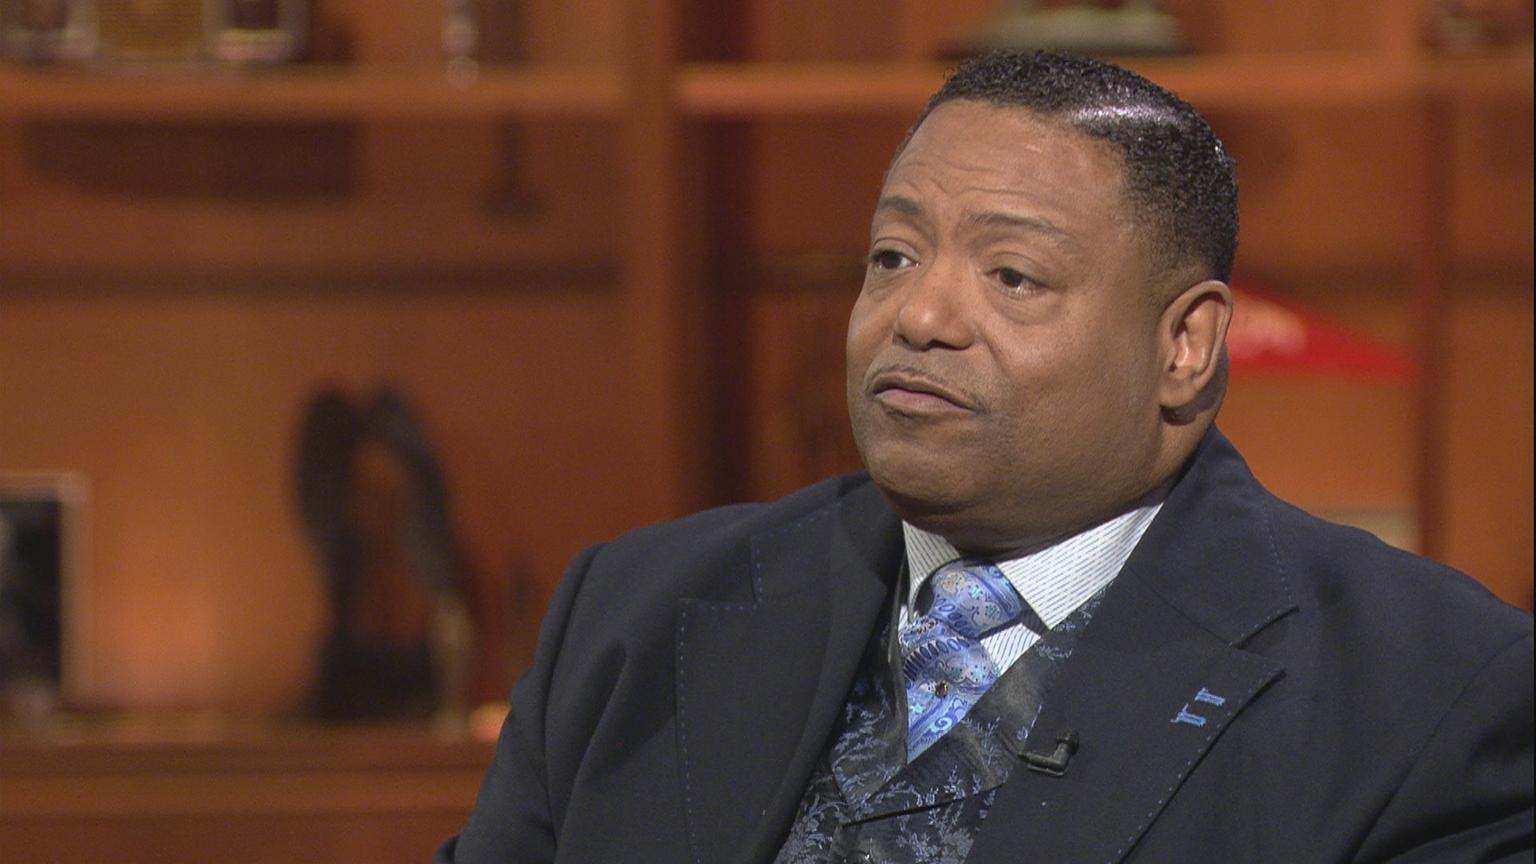 The Rev. Marvin Hunter appears on “Chicago Tonight” on Jan. 21, 2019.